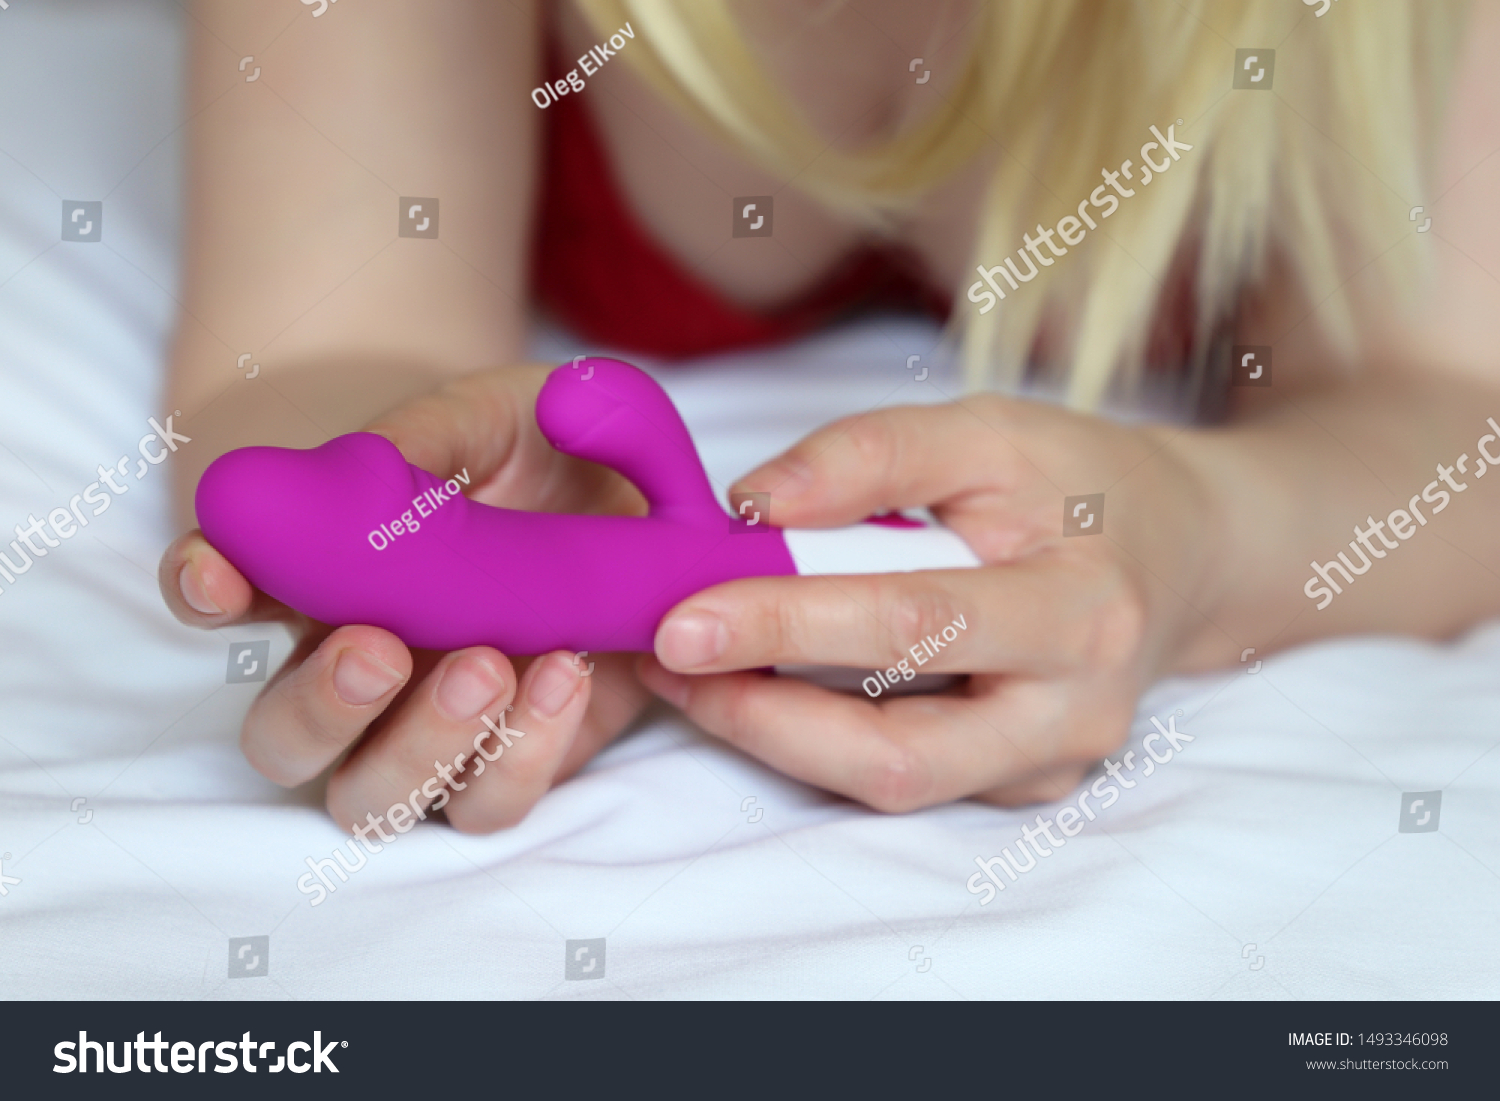 hot blonde play with fingers and sextoys